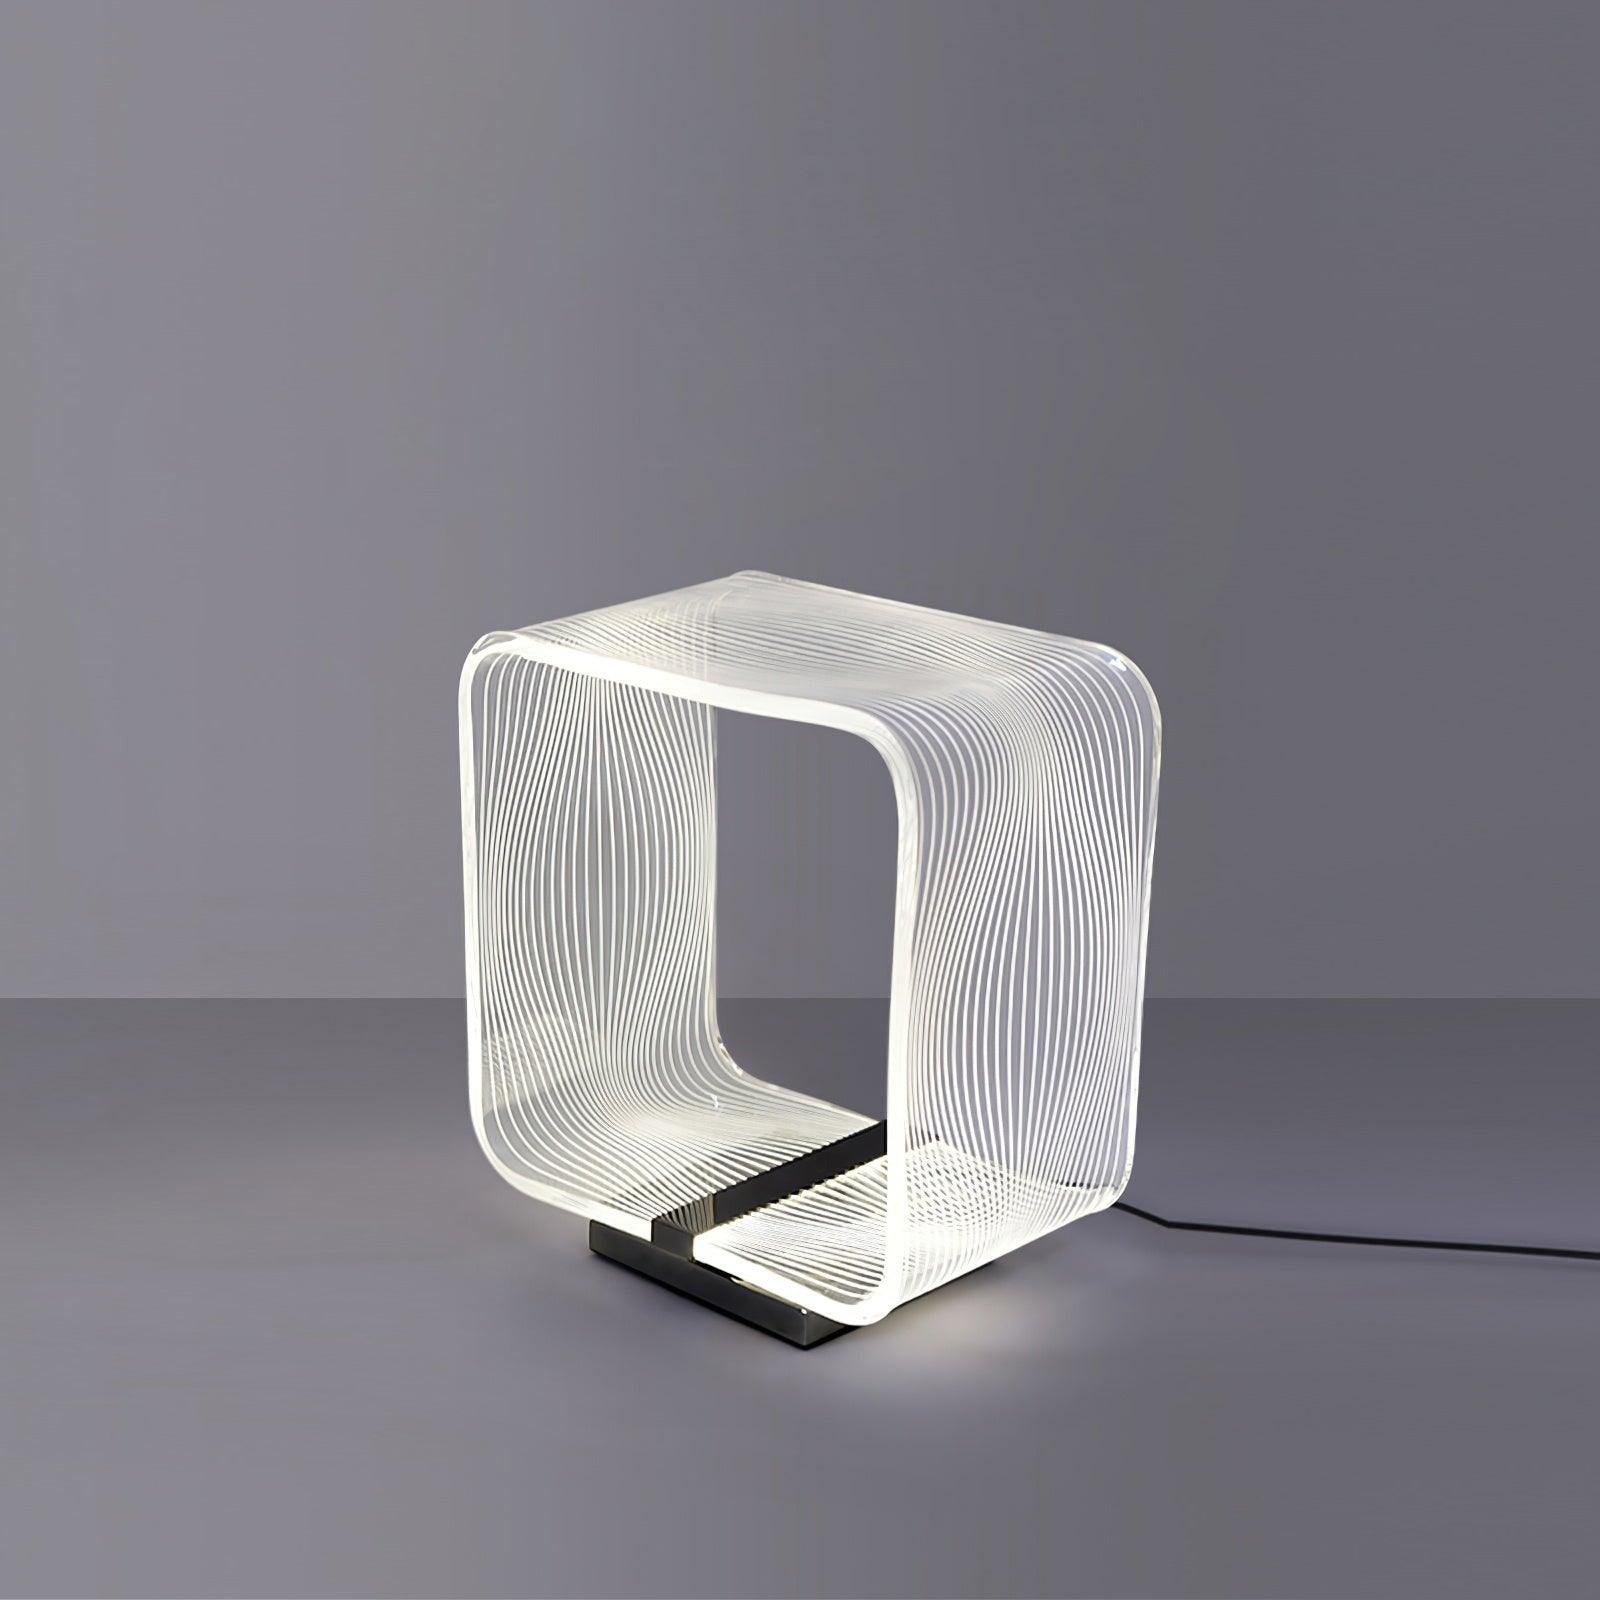 Black and Clear Wire Cube Table Lamp with a Diameter of 11.4″ and a Height of 13″ (29cm x 33cm) - EU Plug